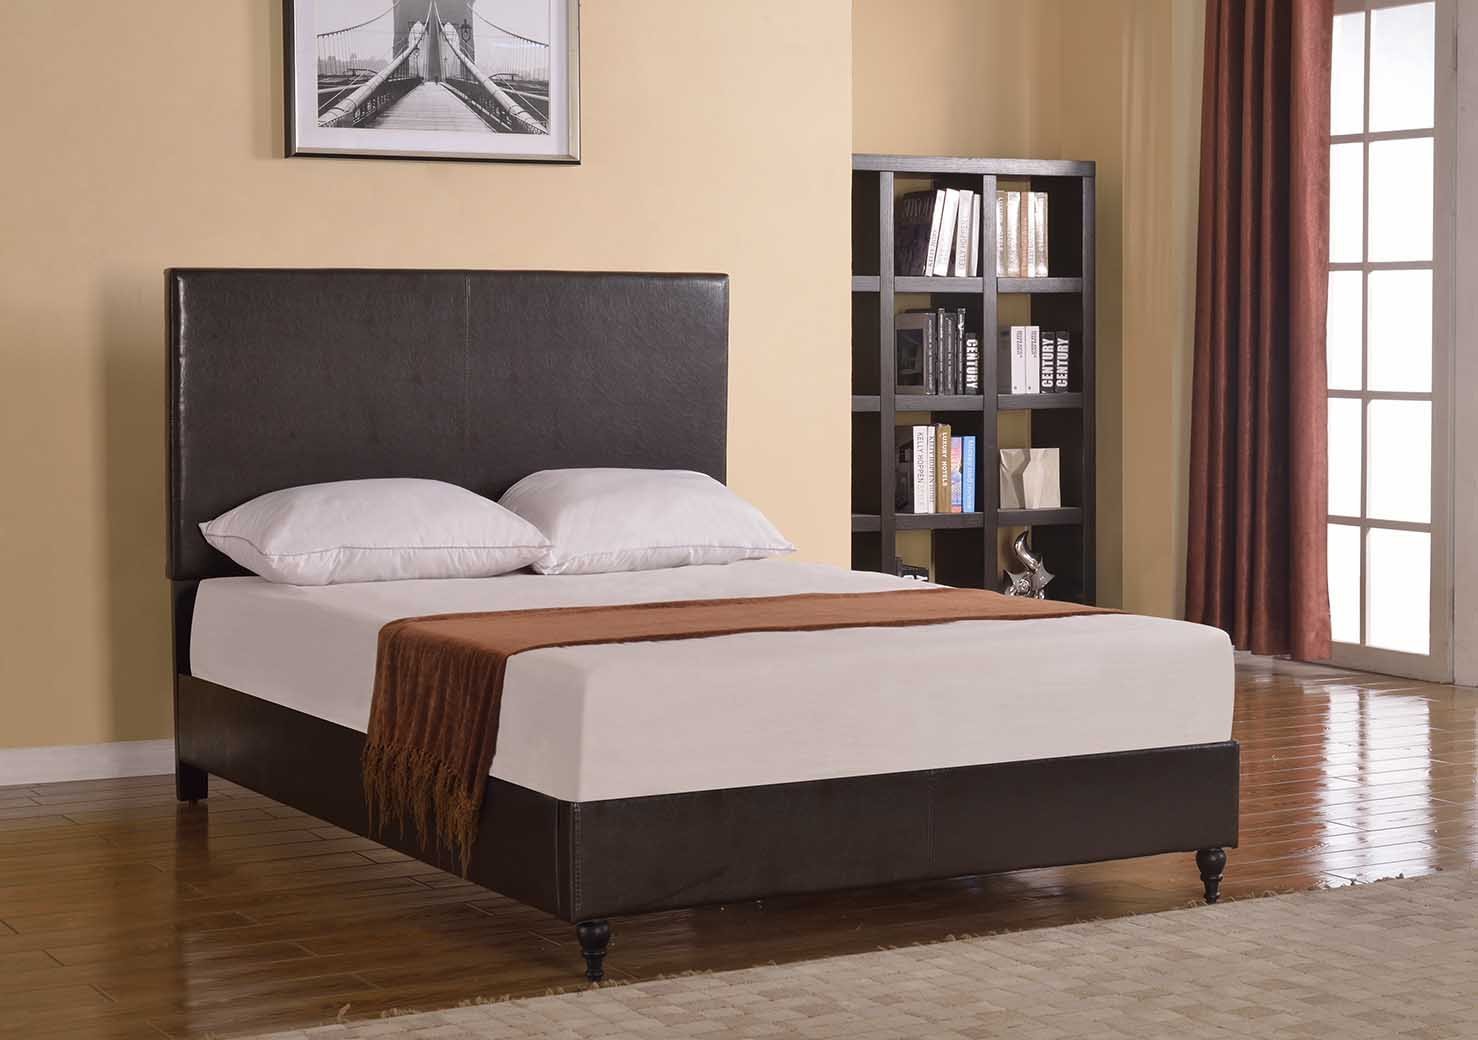 Home Life Brown Leather 47" Tall Headboard Platform Bed with Slats Queen - Complete Bed 5 Year Warranty Included